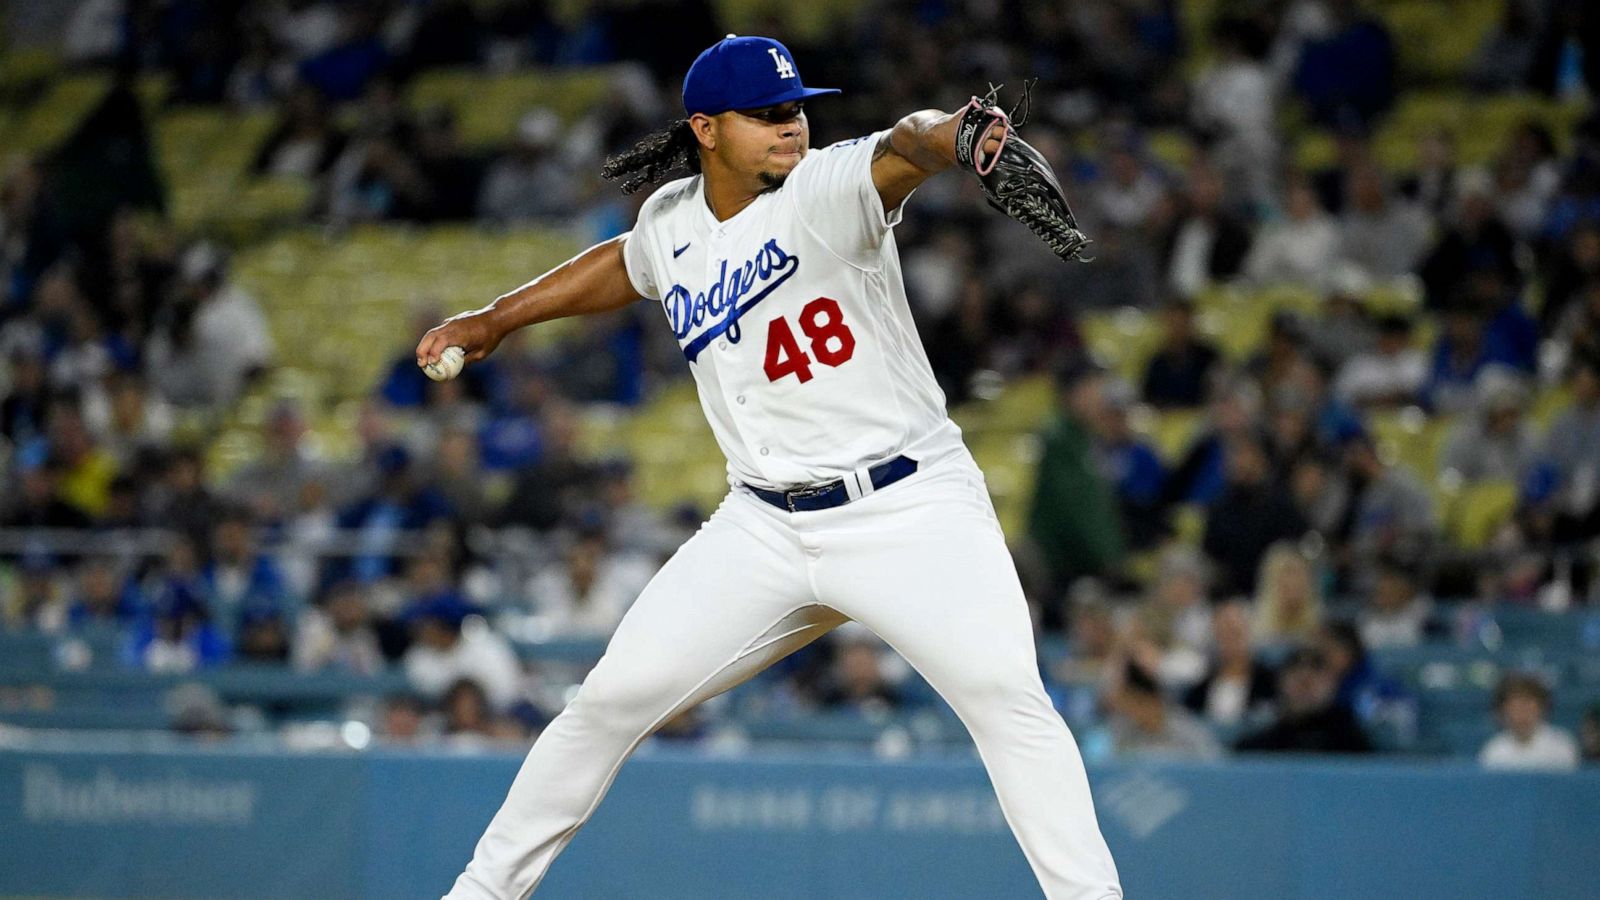 Brusdar Graterol reunites with his mom and helps pitch Dodgers to victory